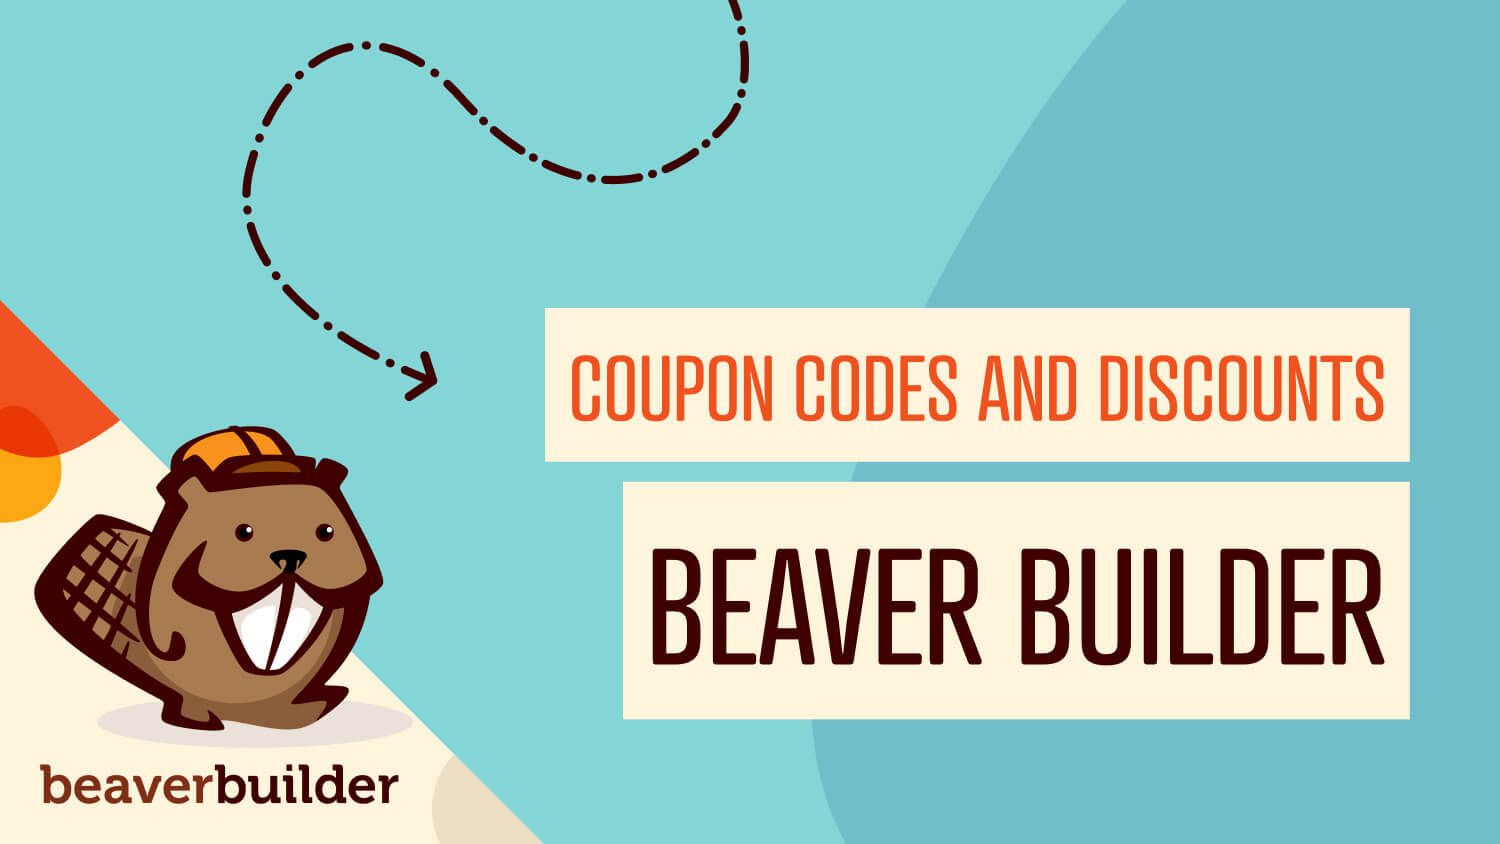 Beaver Builder Coupon Codes and Discounts